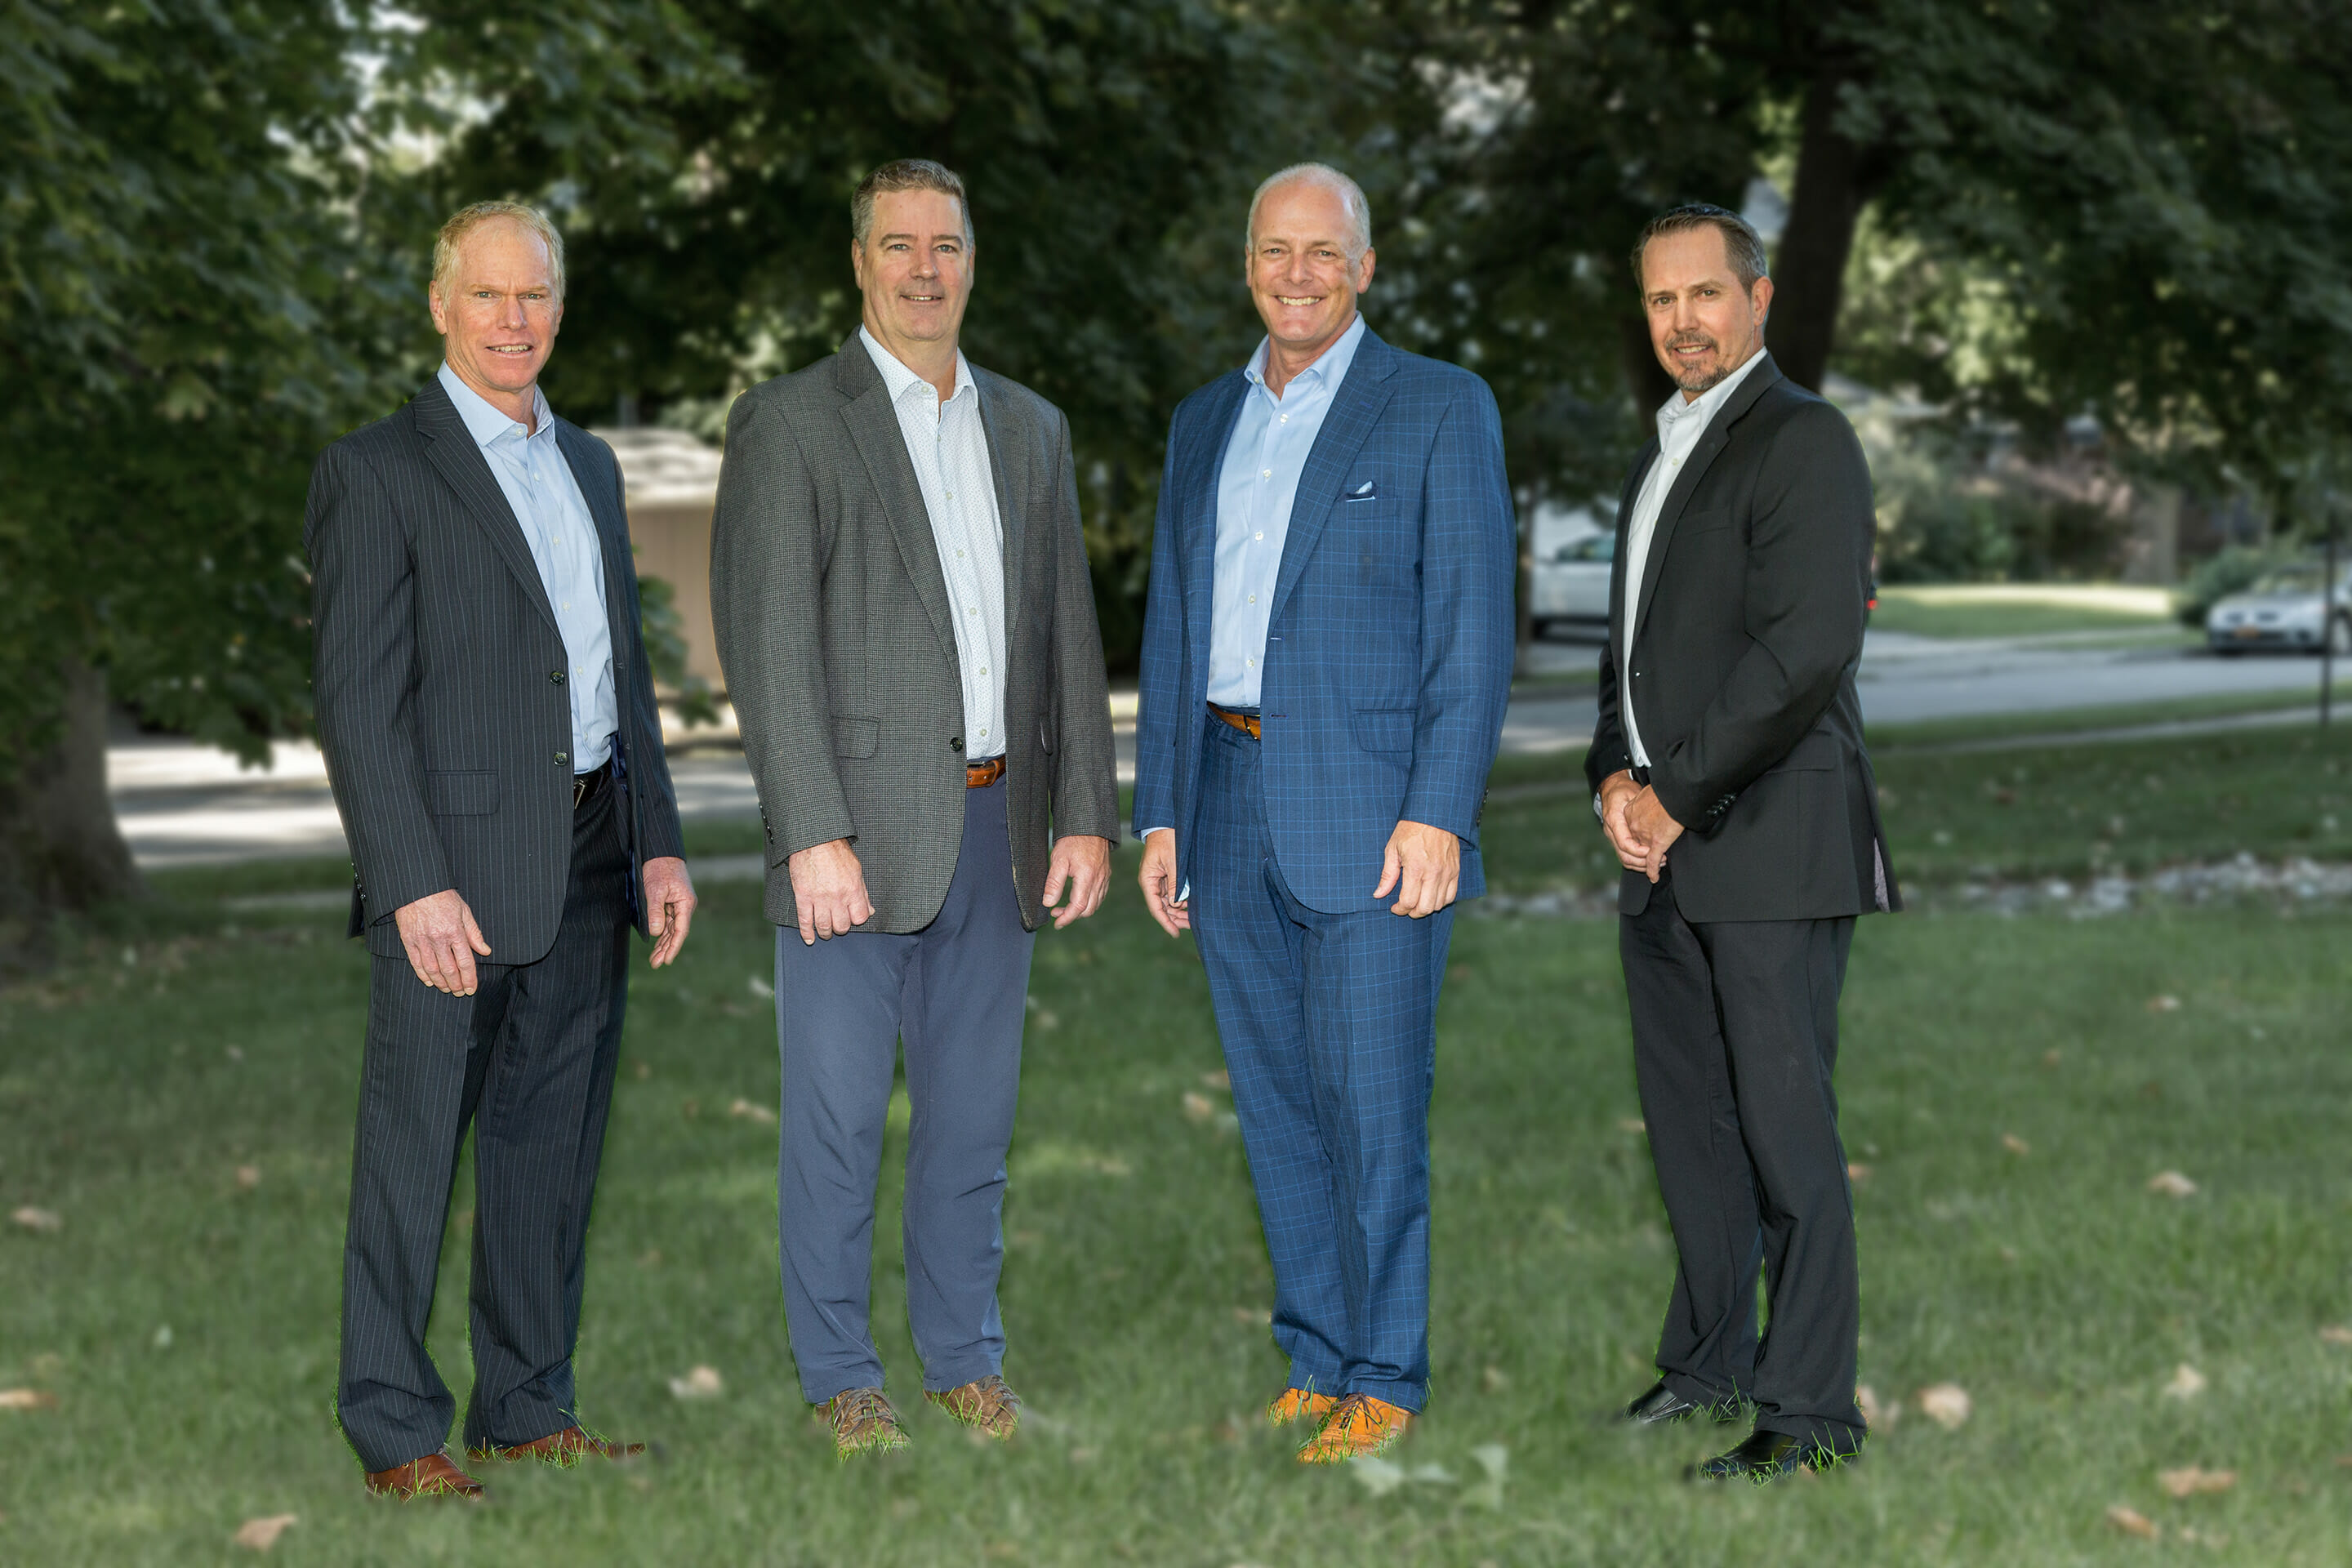 (l-r) MRB Group Executive Vice President and COO James Oberst, PE;  HBT Partner James Tripp, AIA; HBT Managing Partner Trevor Harrison, AIA; and MRB Group President and CEO Ryan T. Colvin, PE.